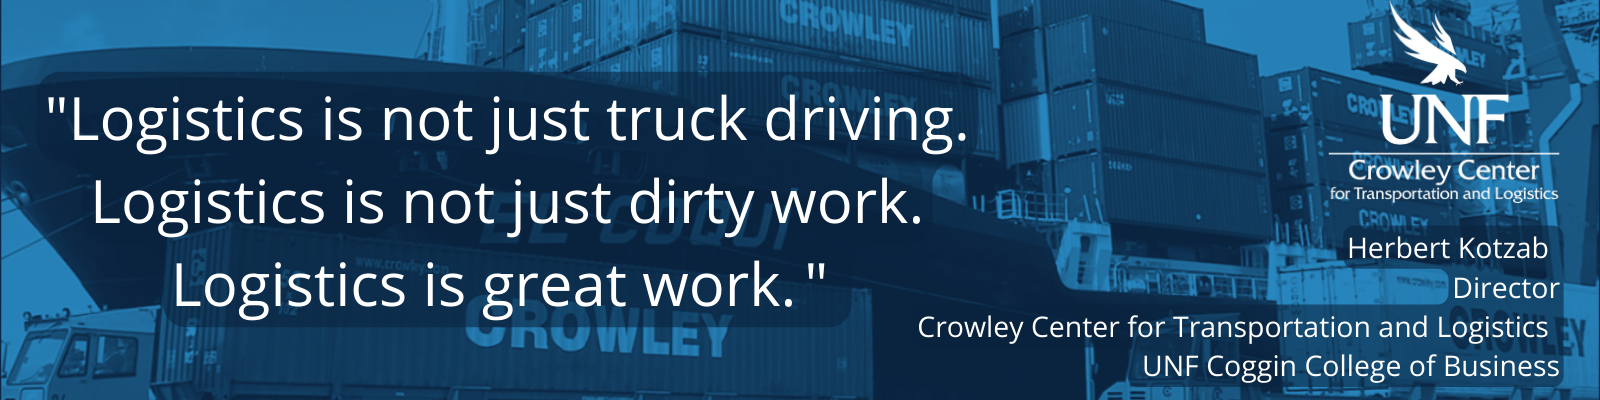 Logistics is not just truck driving. Logistics is not just dirty work. Logistics is great work. Herbert Kotzab Director Crowley Center for Transportation and Logistics UNF Coggin College of Business with logo of CCTL